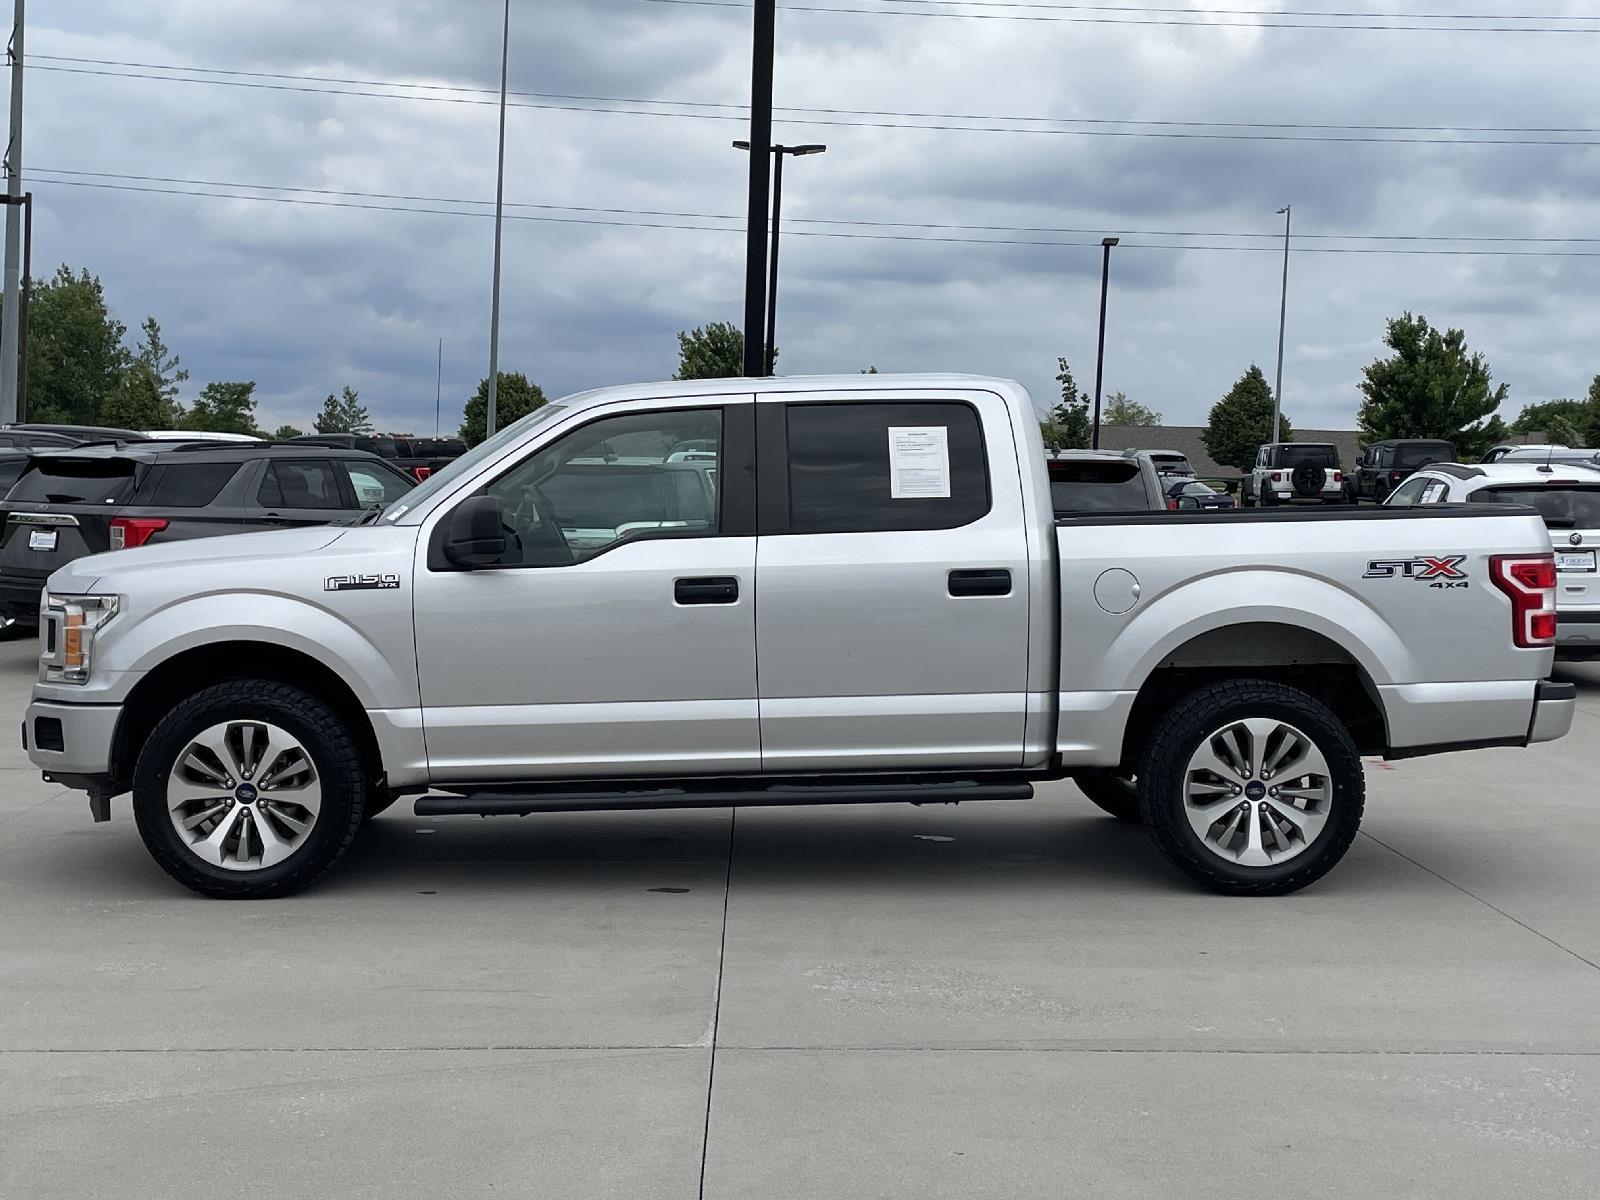 Used 2018 Ford F-150 XL Crew Cab Truck for sale in Lincoln NE